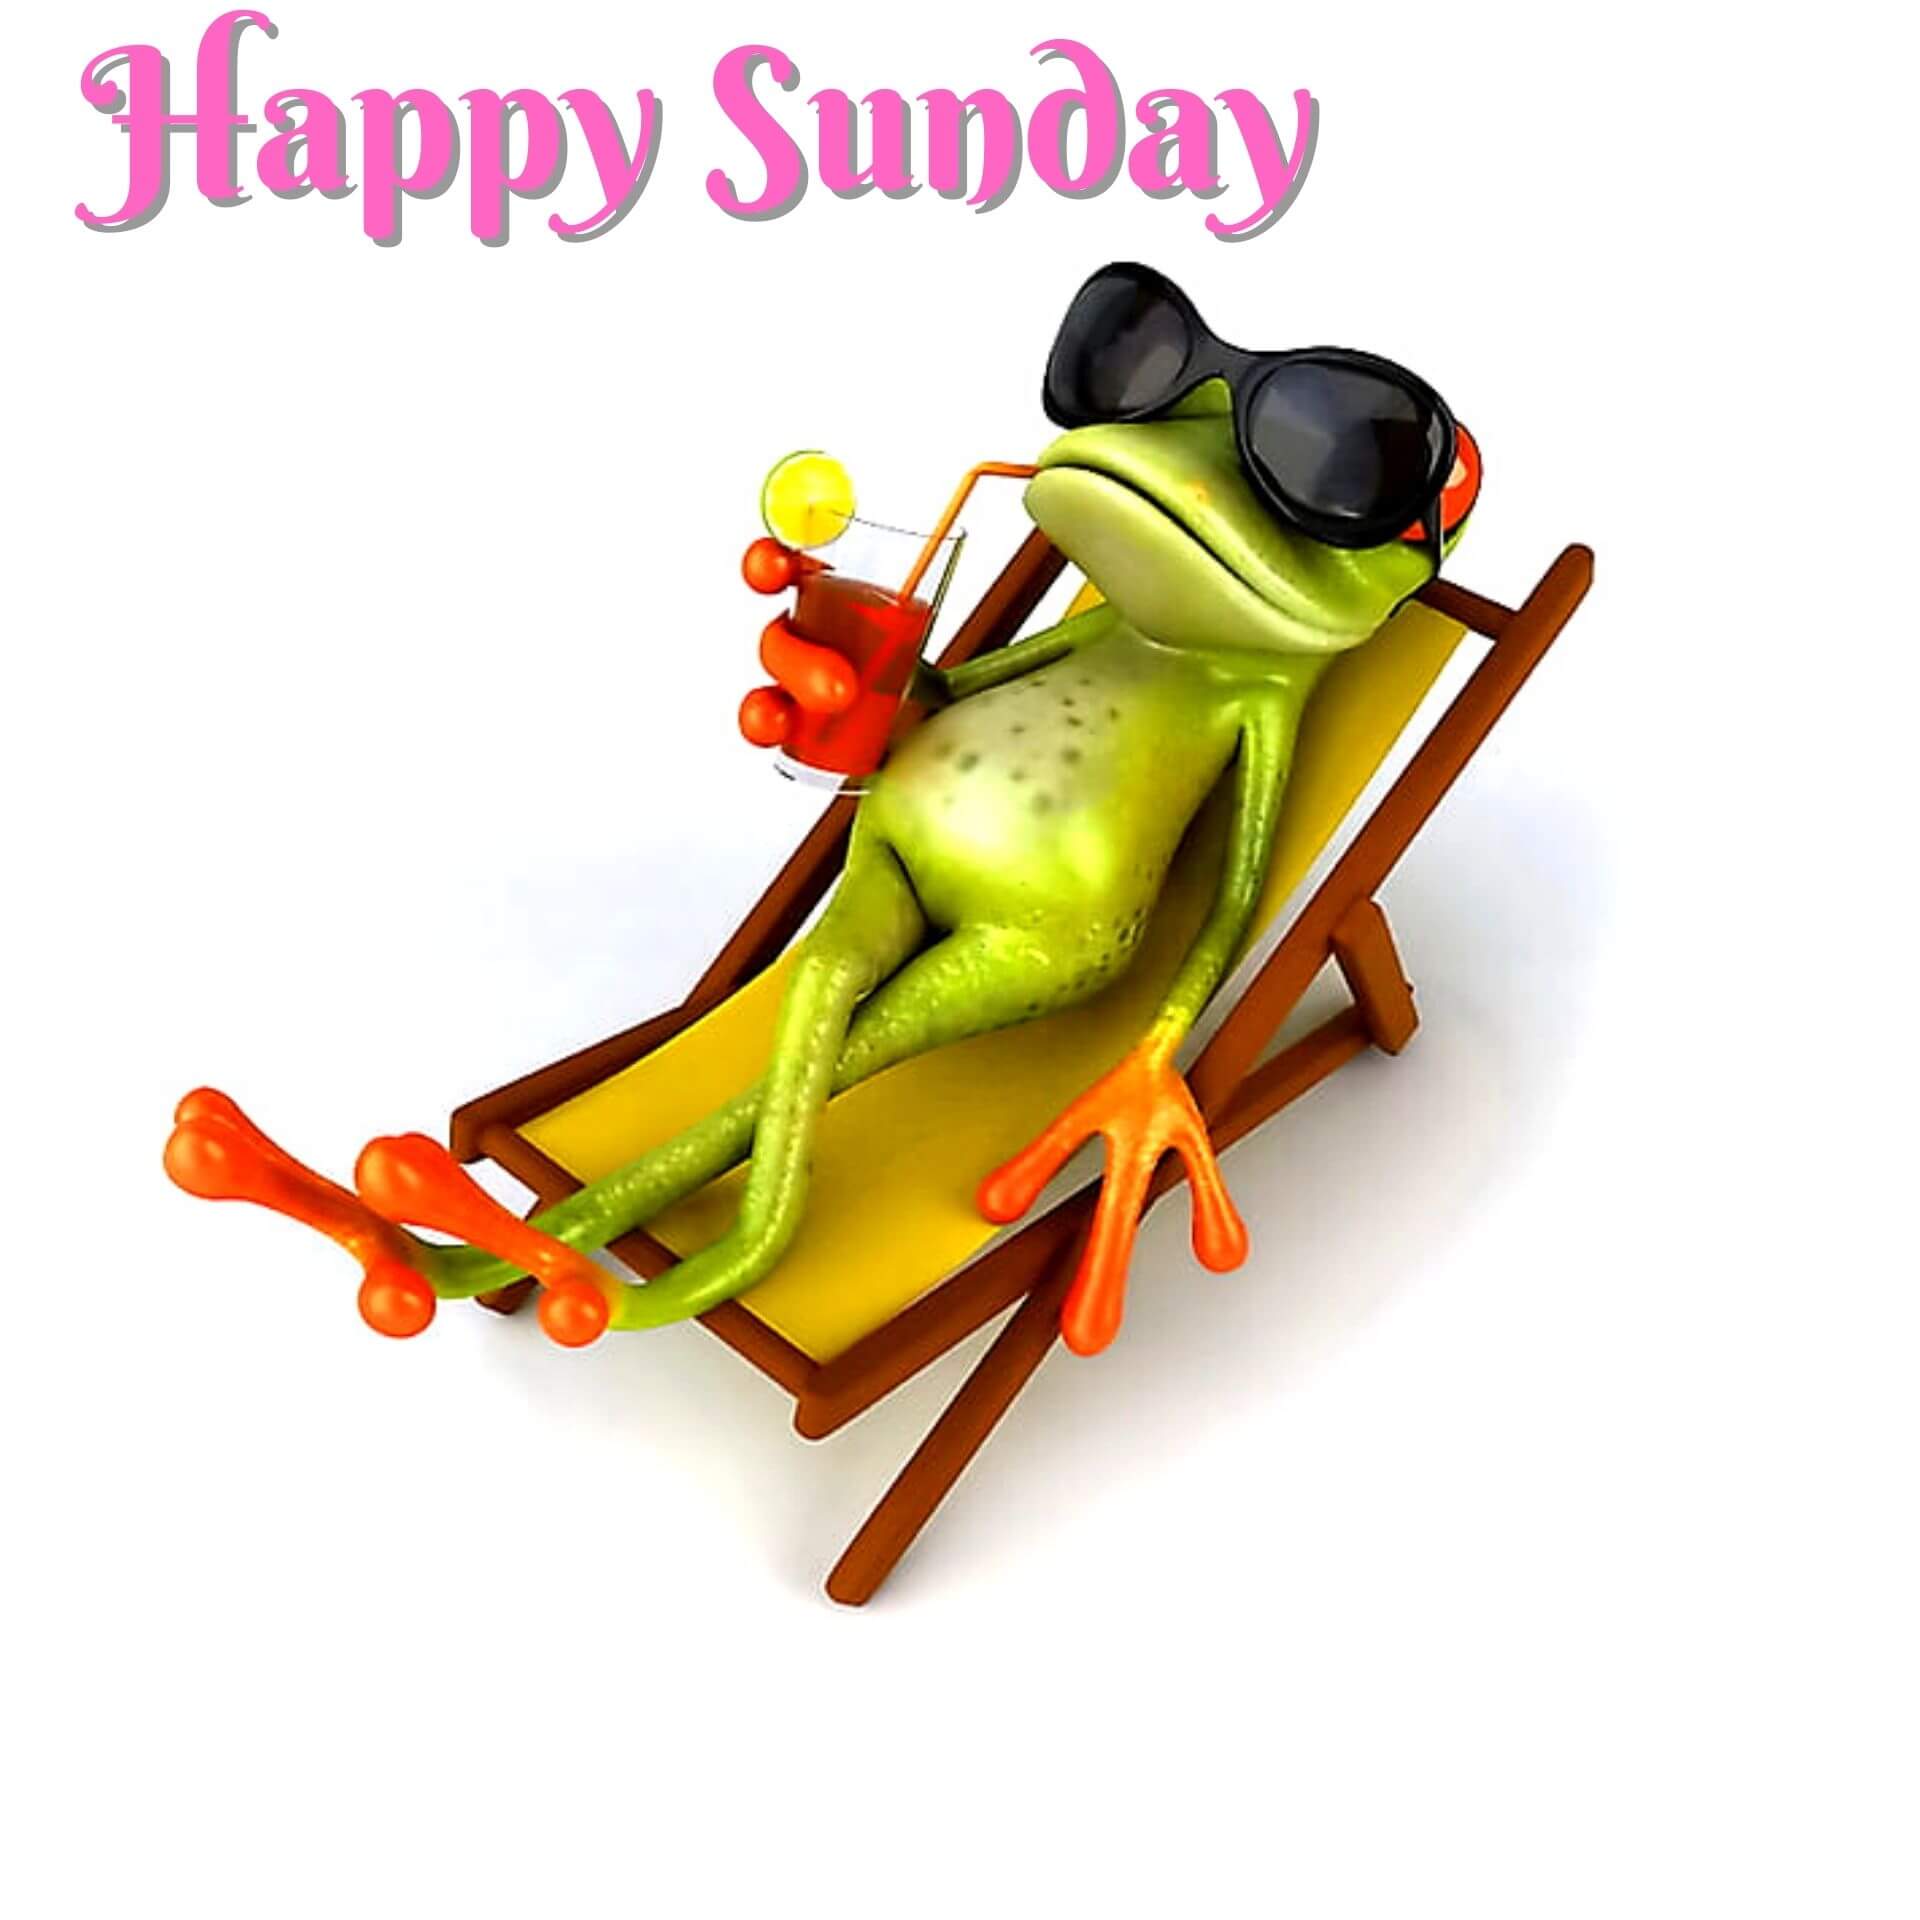 Funny Sunday Wallpaper Free Download